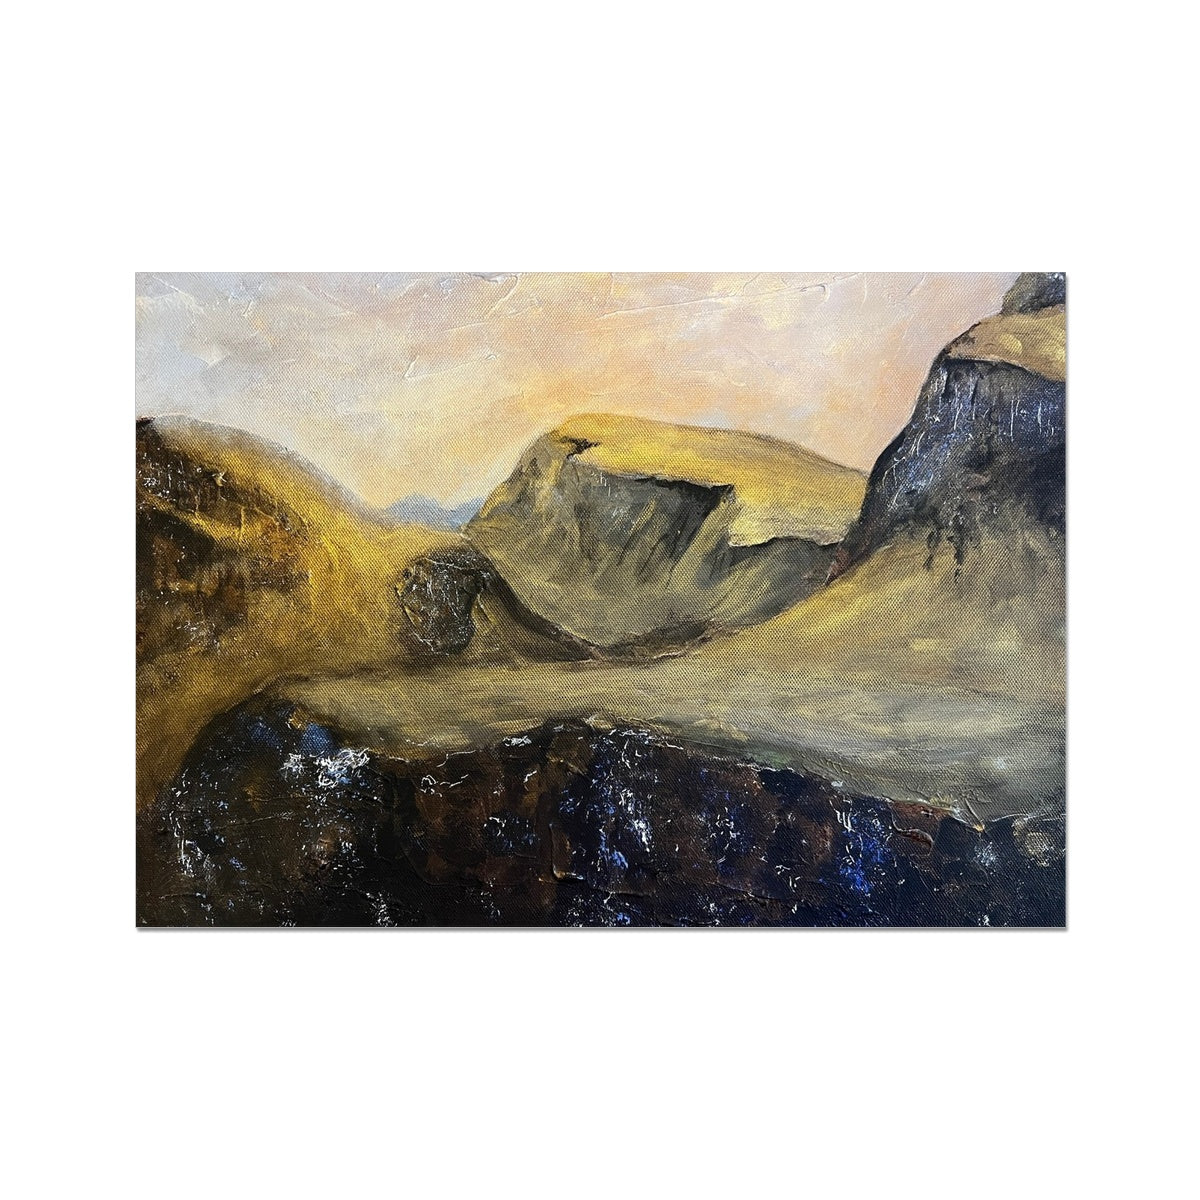 The Quiraing Skye Painting | Fine Art Prints From Scotland-Unframed Prints-Skye Art Gallery-A2 Landscape-Paintings, Prints, Homeware, Art Gifts From Scotland By Scottish Artist Kevin Hunter